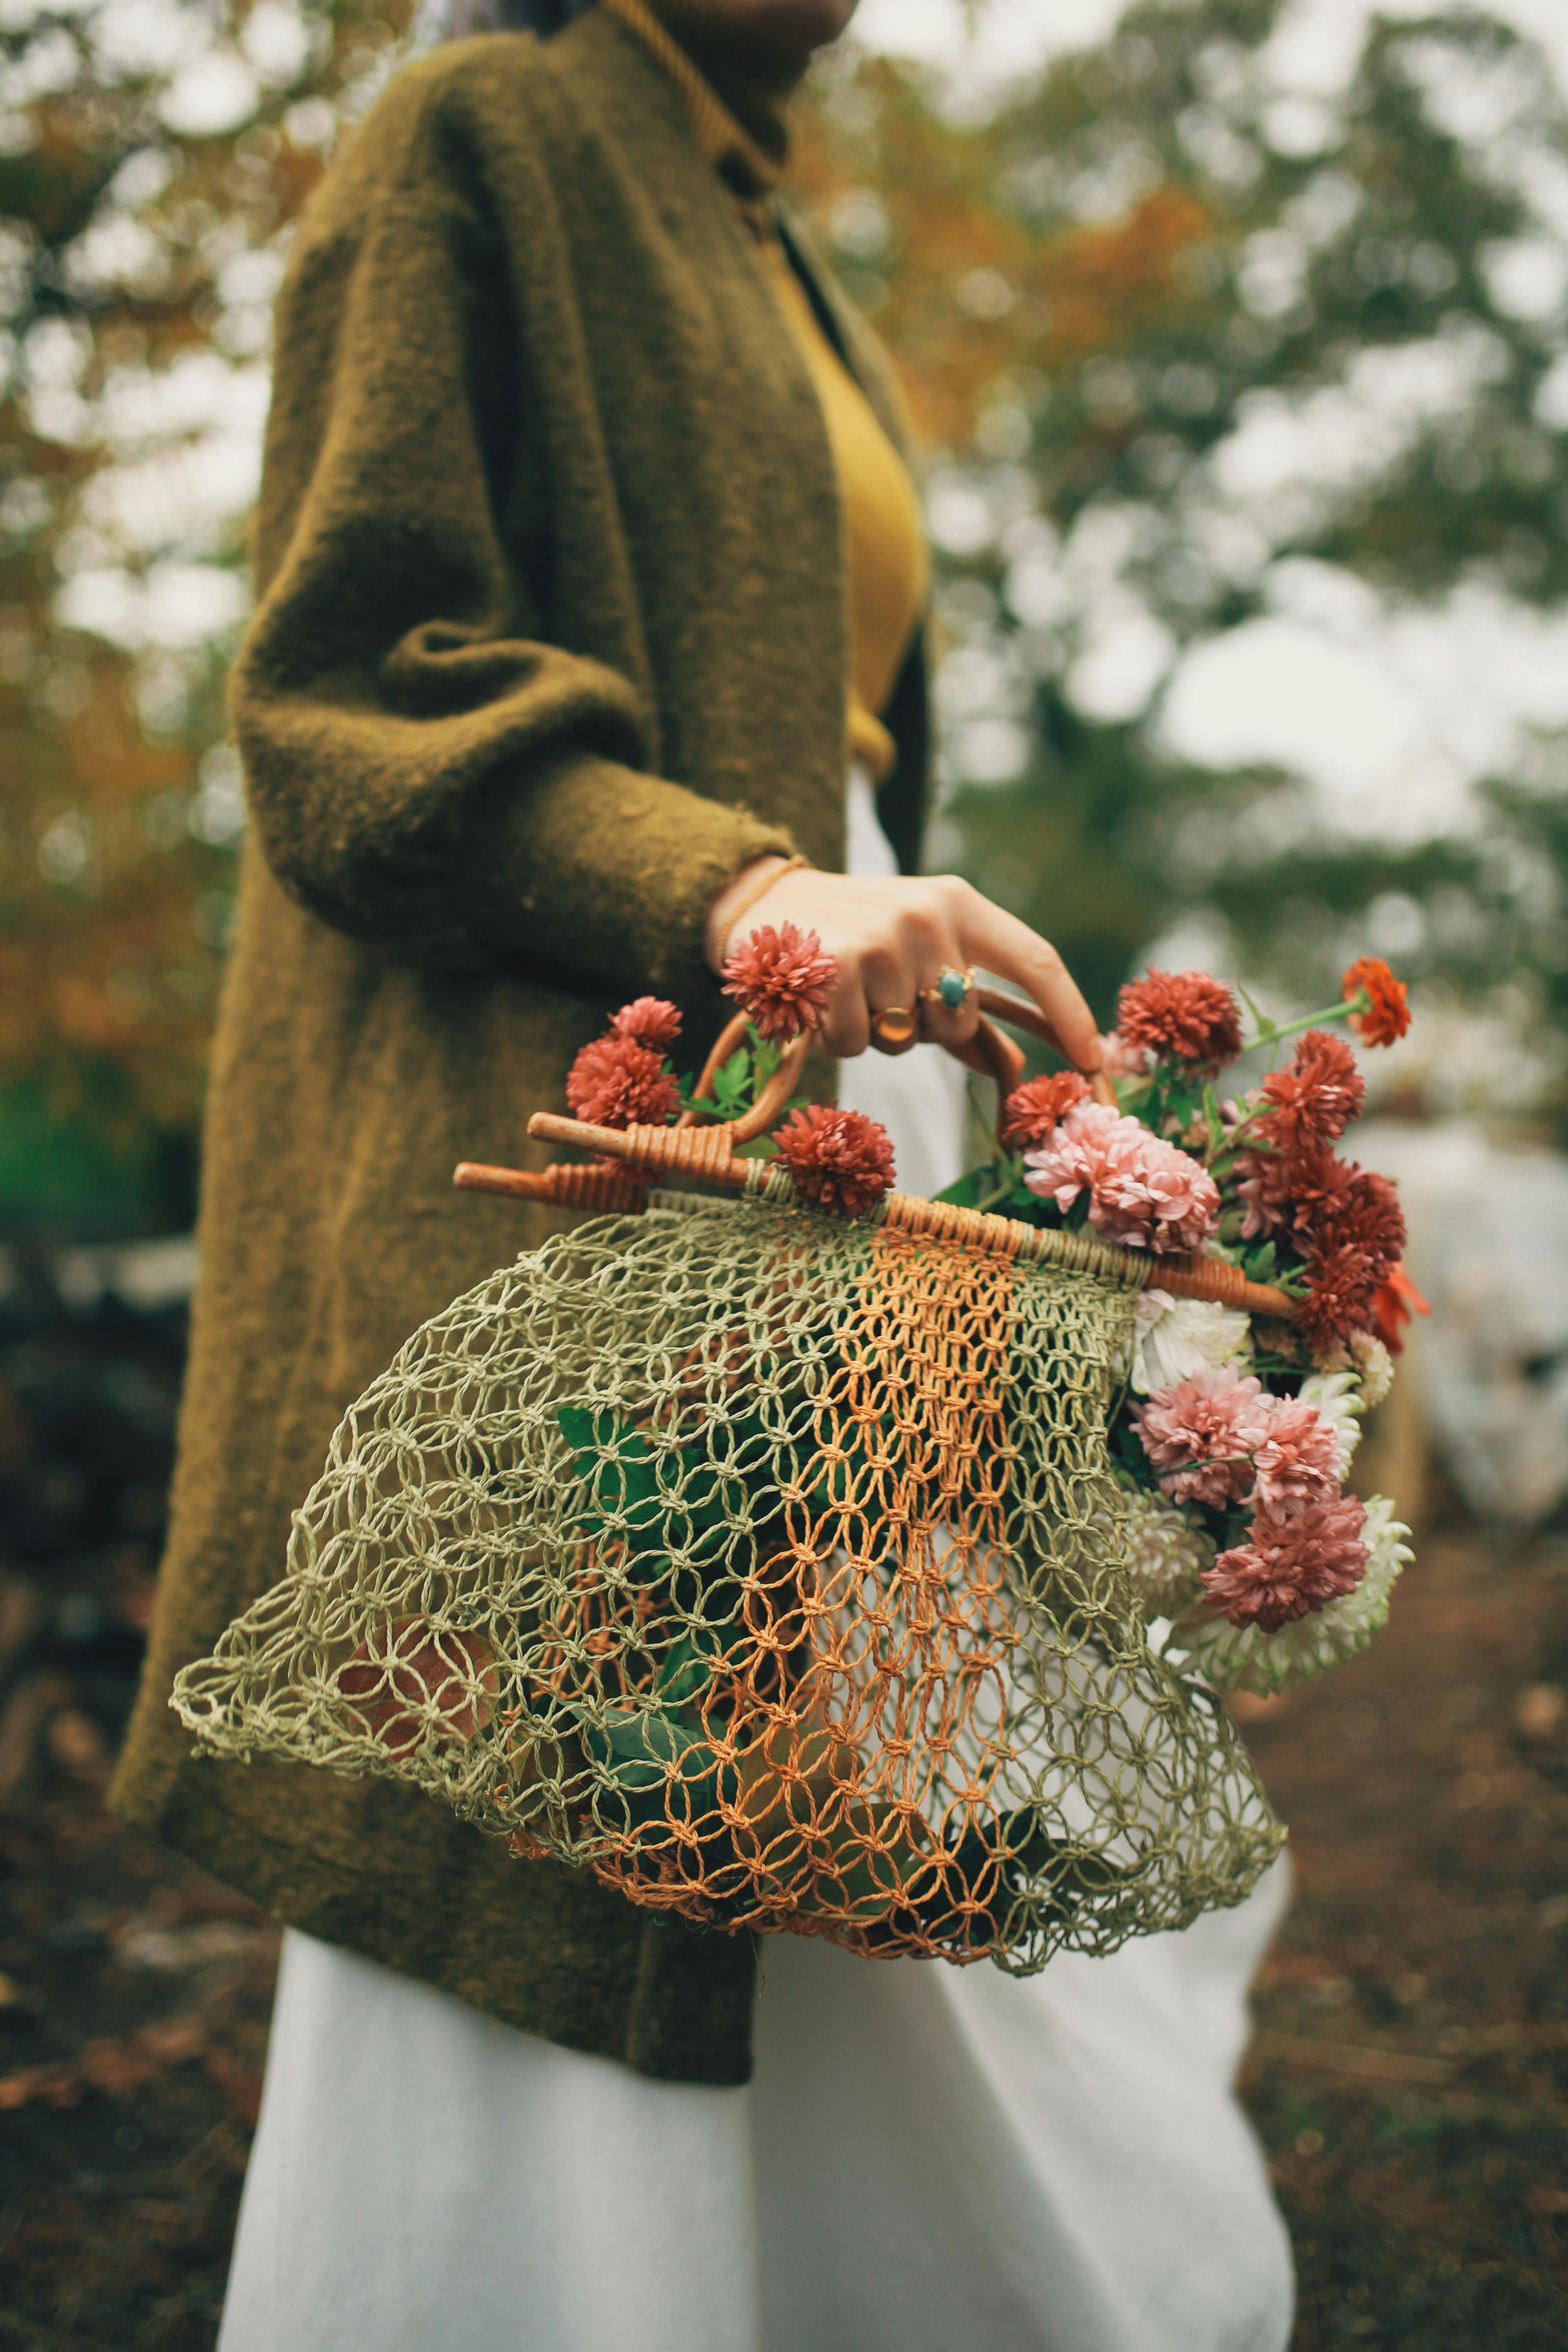 crop woman in warm outfit carrying knitted shopper with red flowers